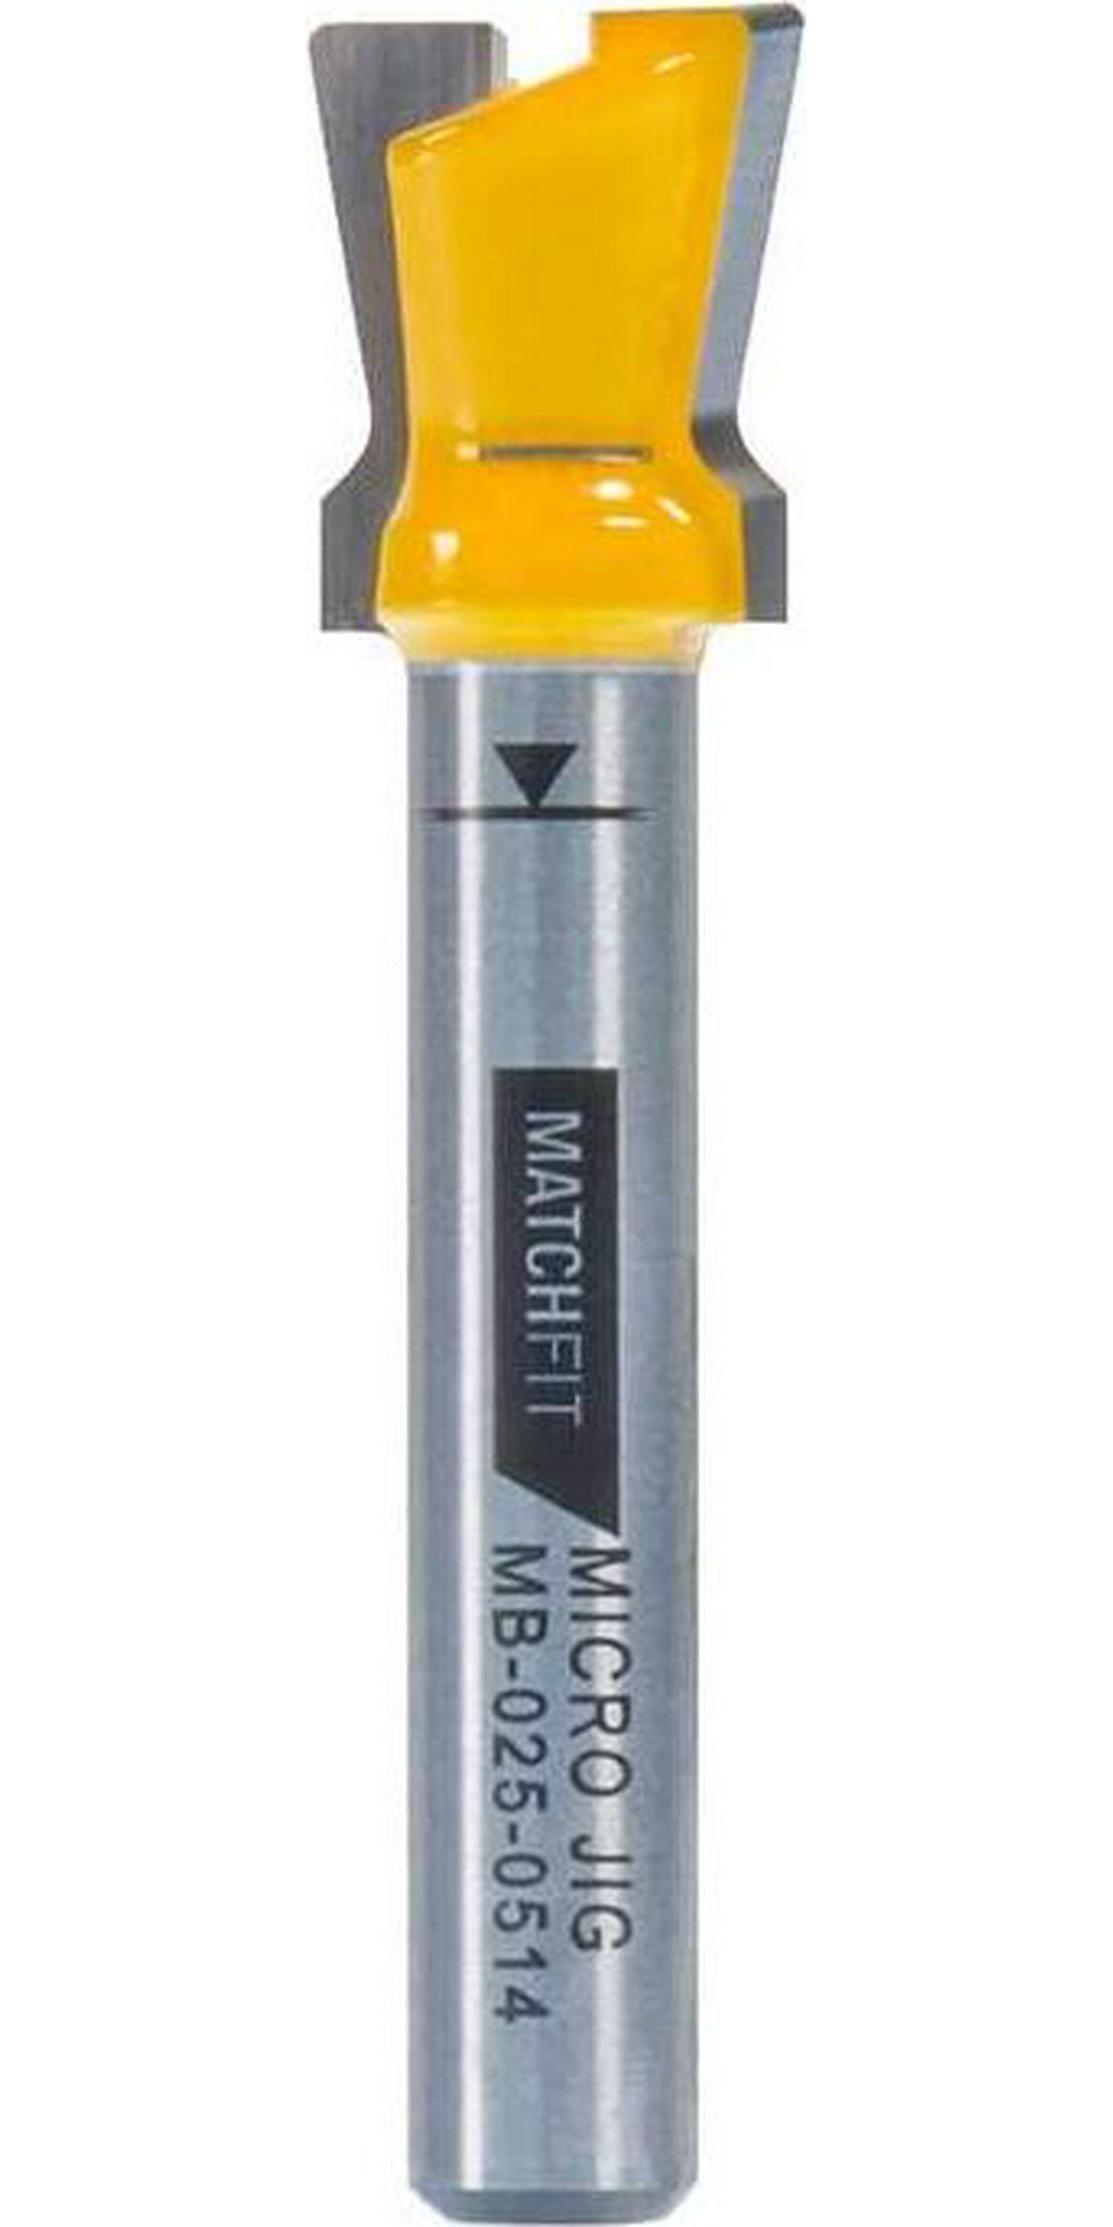 Micro Jig, Micro Jig 1/4-inch MatchFit Dovetail Relief Router Bit